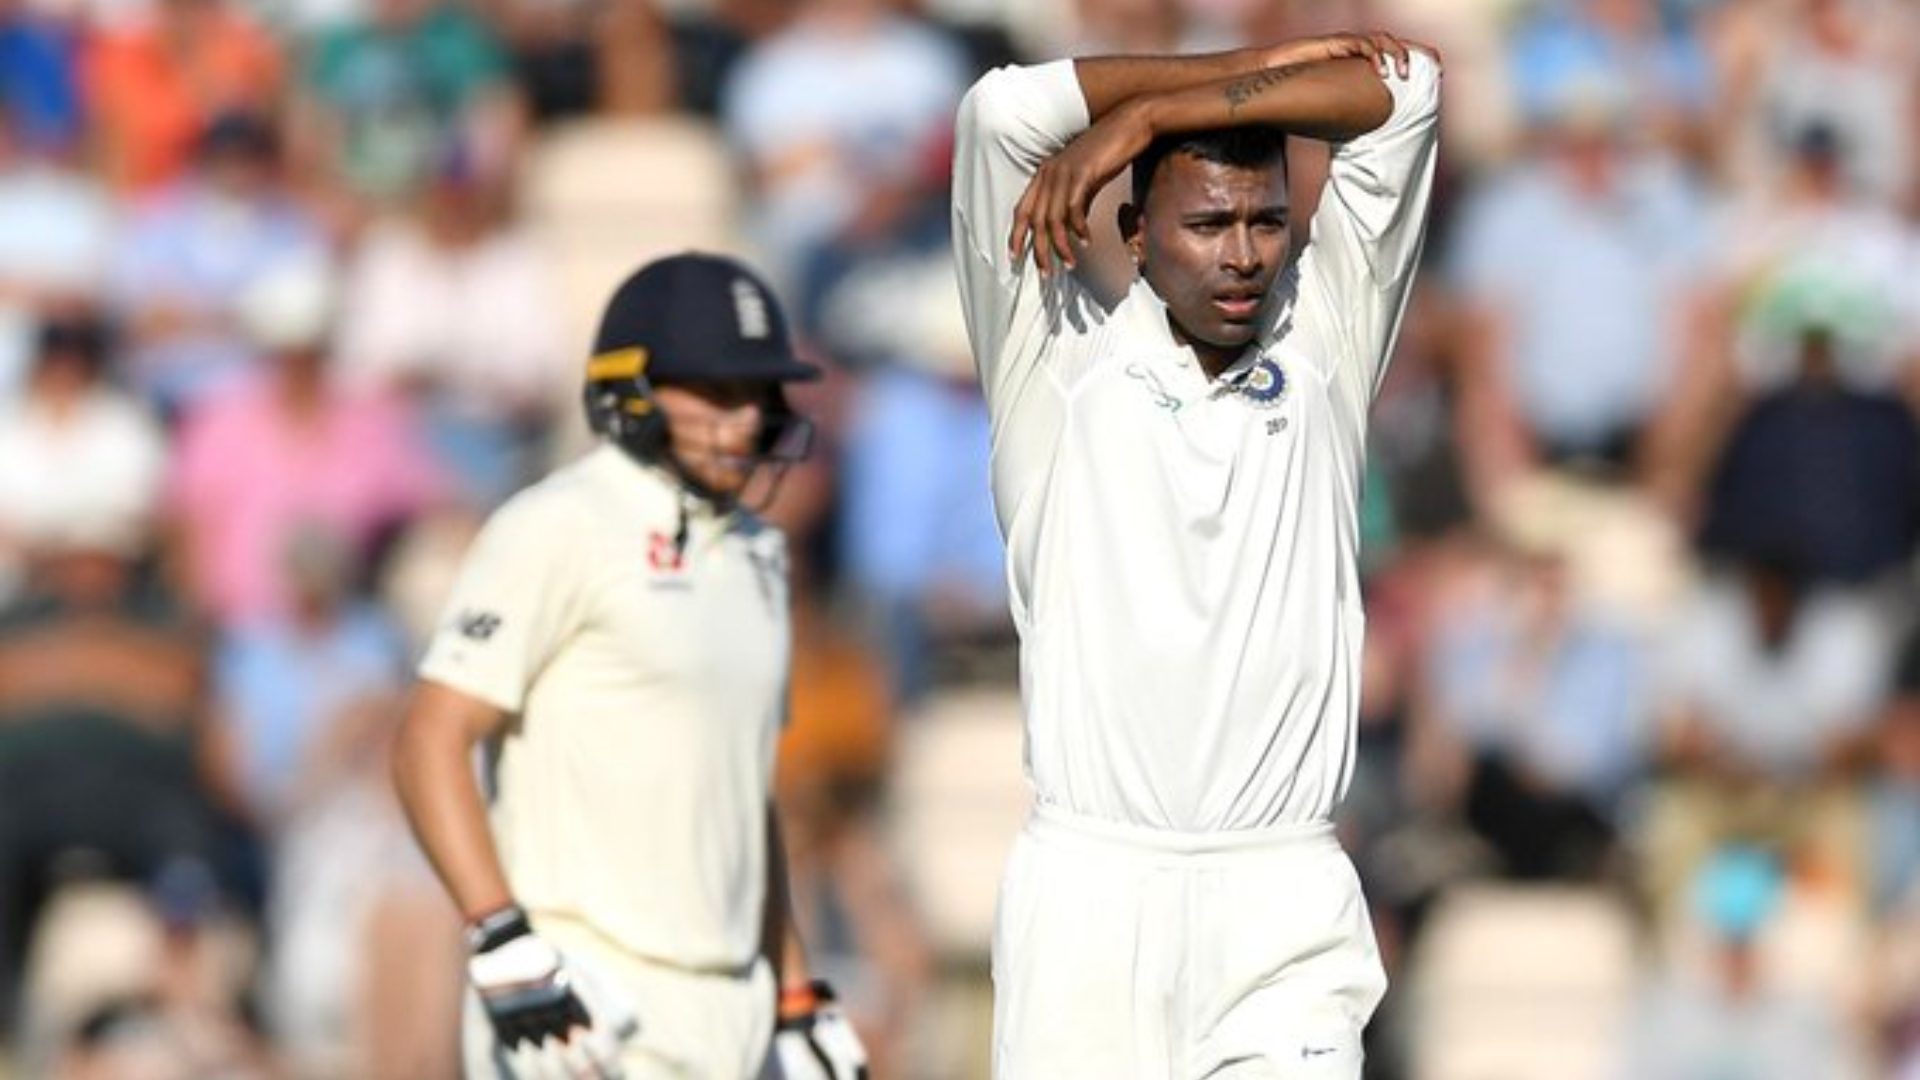 Hardik Pandya last played in Tests in 2018 and it was against England in Southampton.